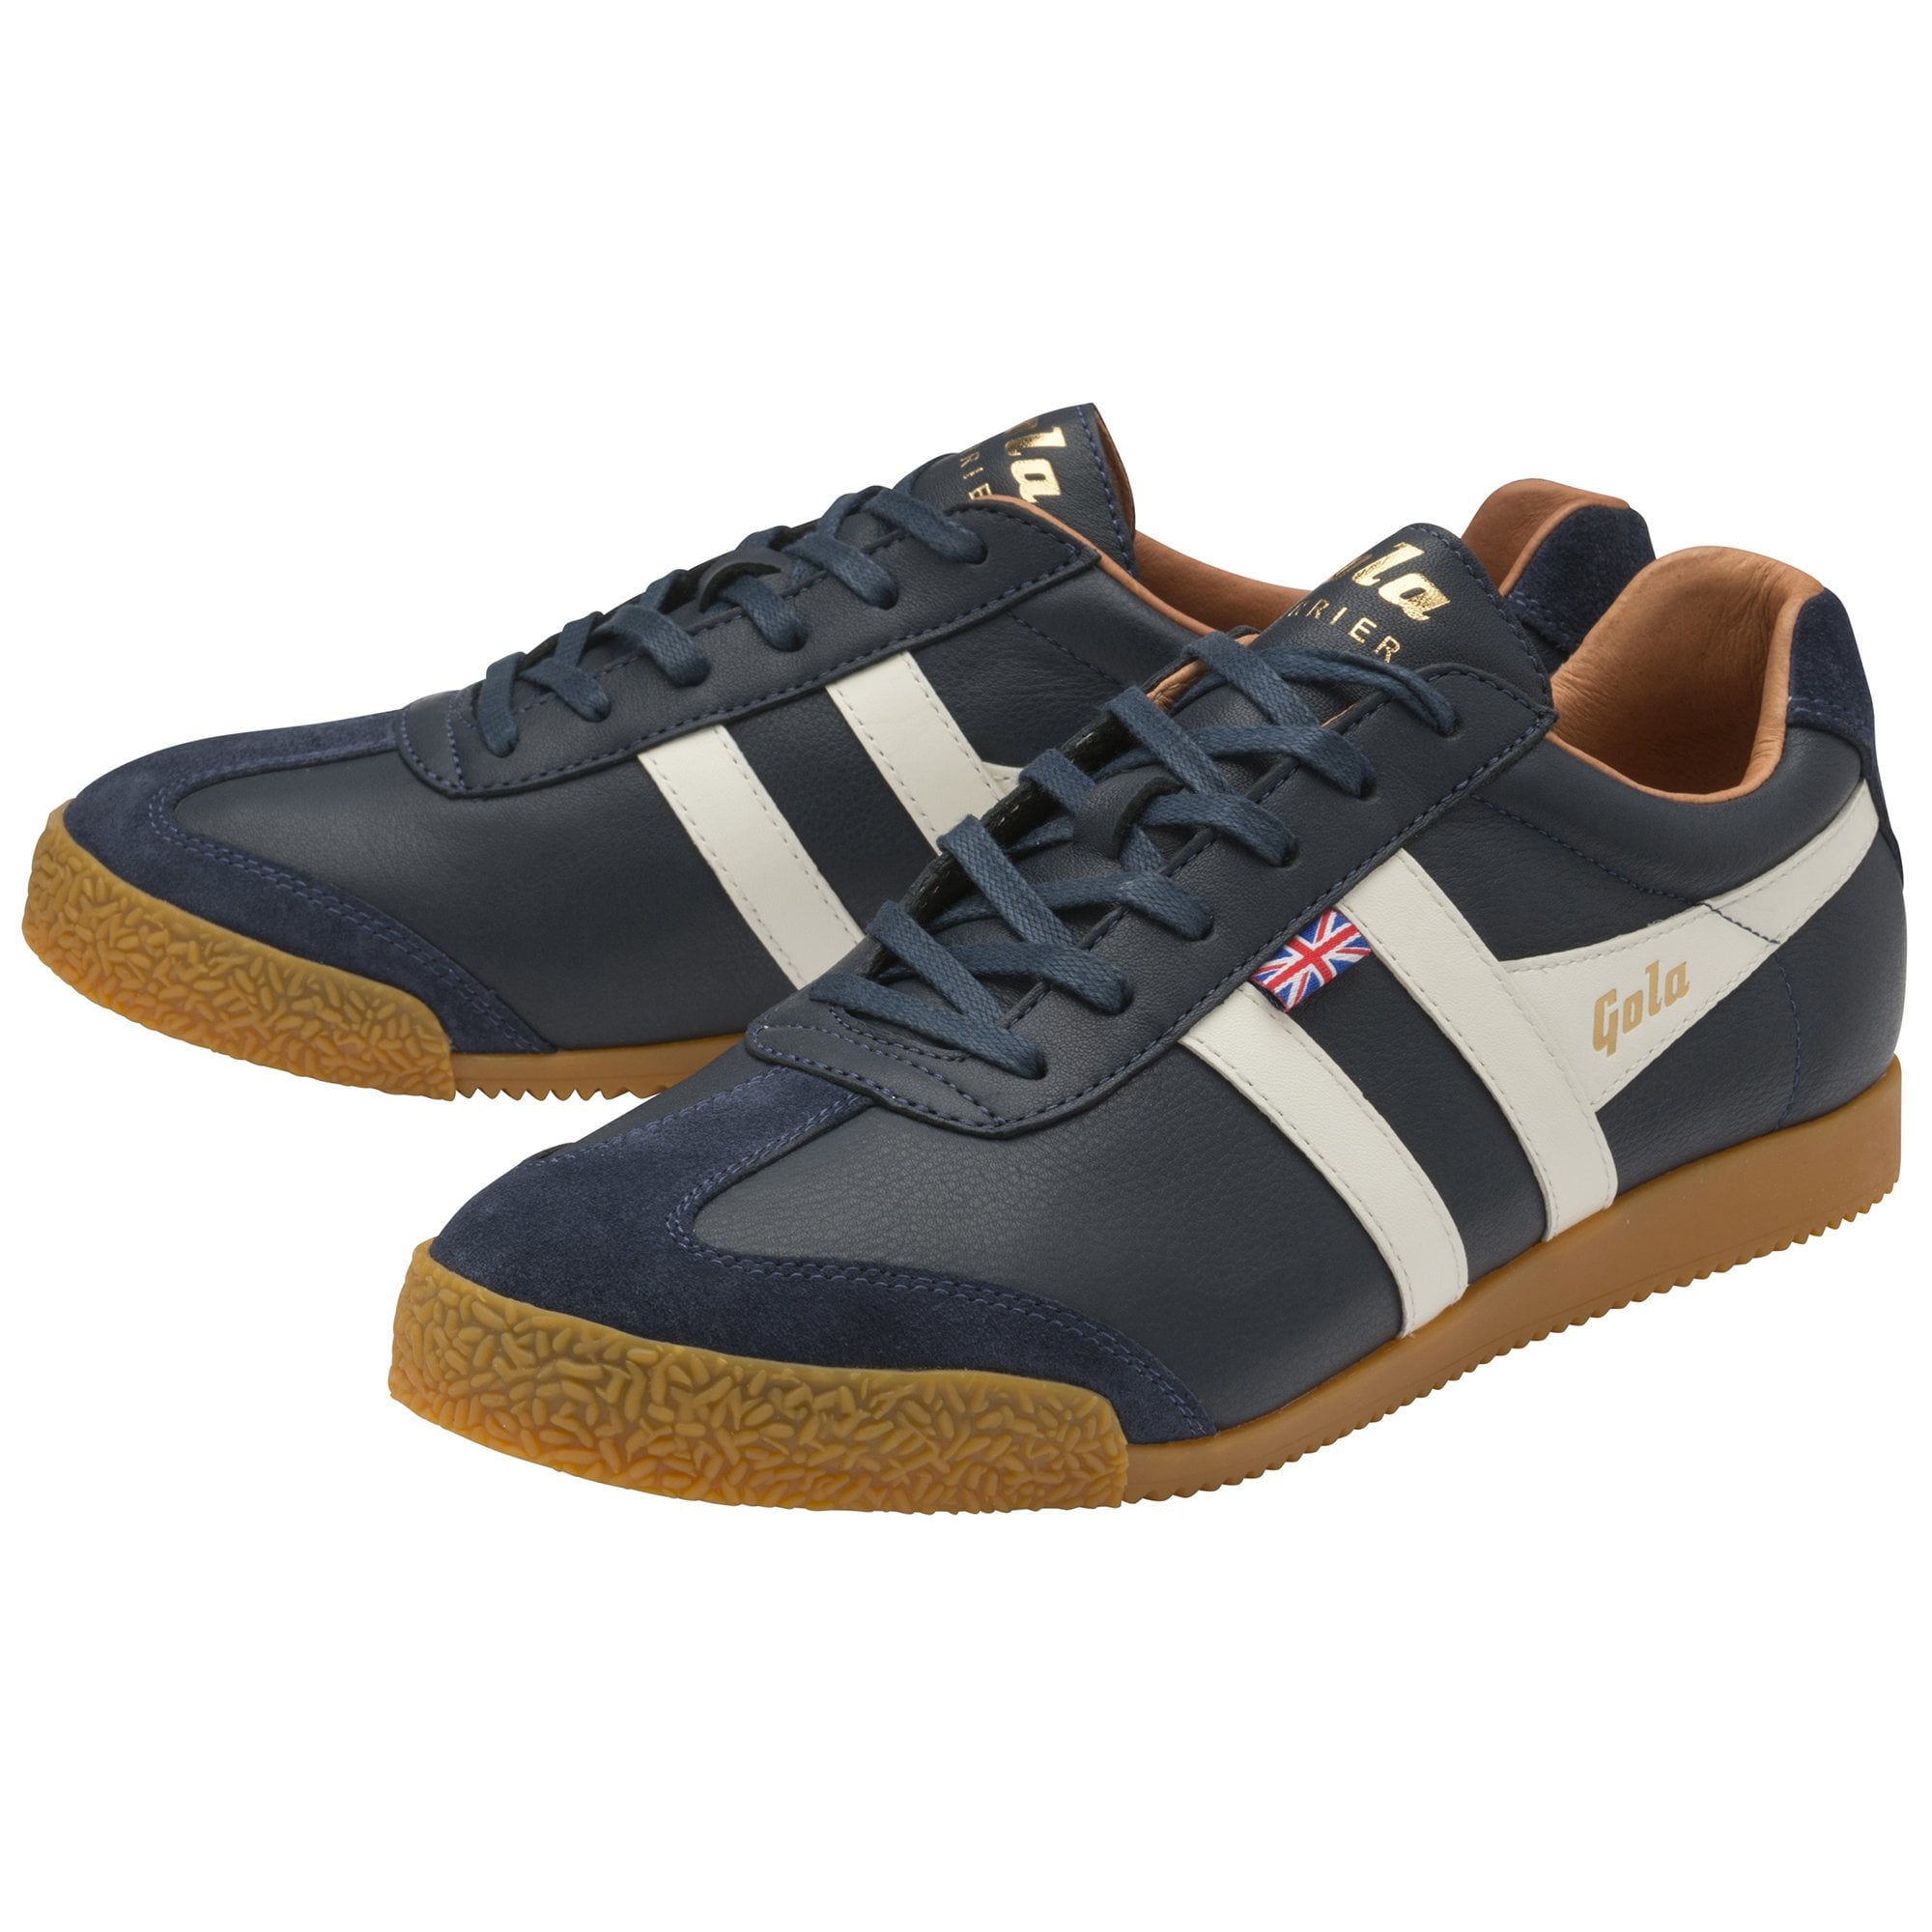 Gola Made in England - 1905 Men's Harrier Elite Trainers Navy/Off White